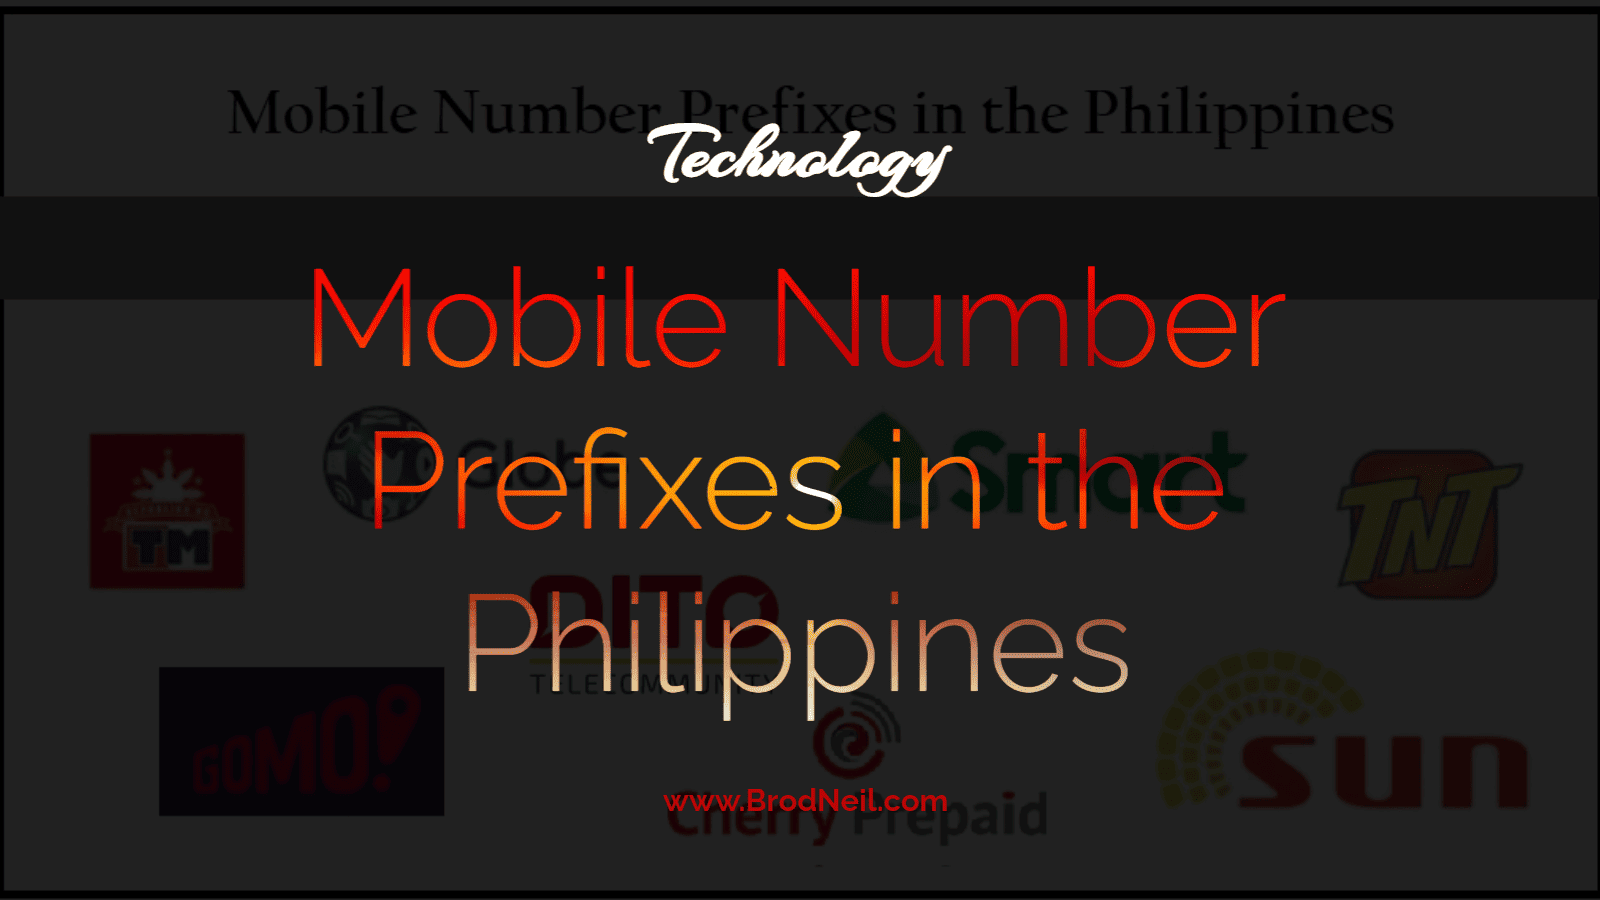 Mobile Number Prefixes in the Philippines